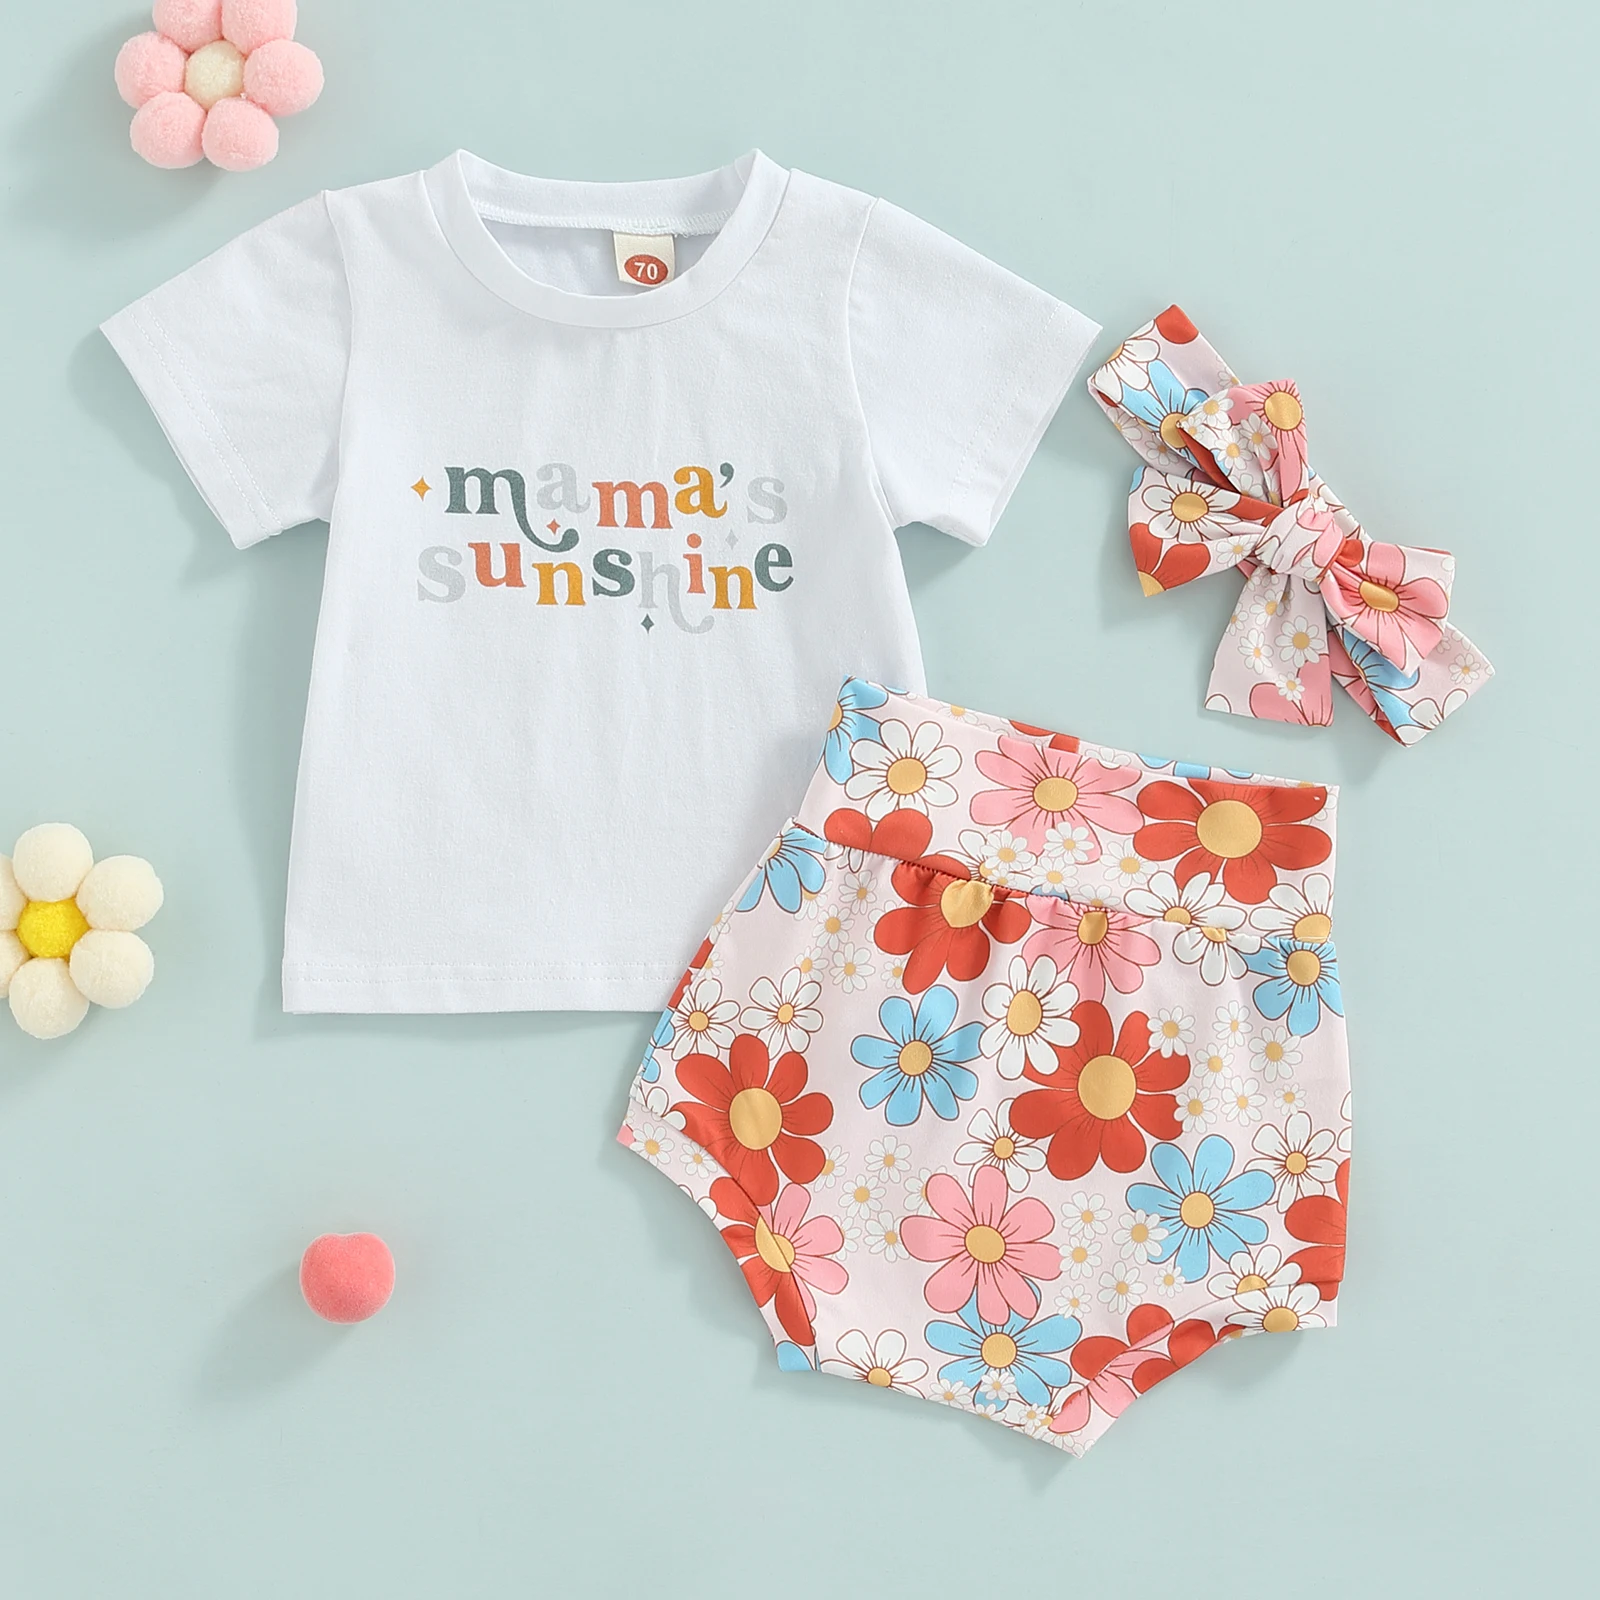 baby dress and set 2022 0-24M Infant Girl Summer Clothing Mama Sunshine Letter Print Round Neck Short Sleeve Top+Floral High Waist Shorts Cute 3pcs baby outfit matching set